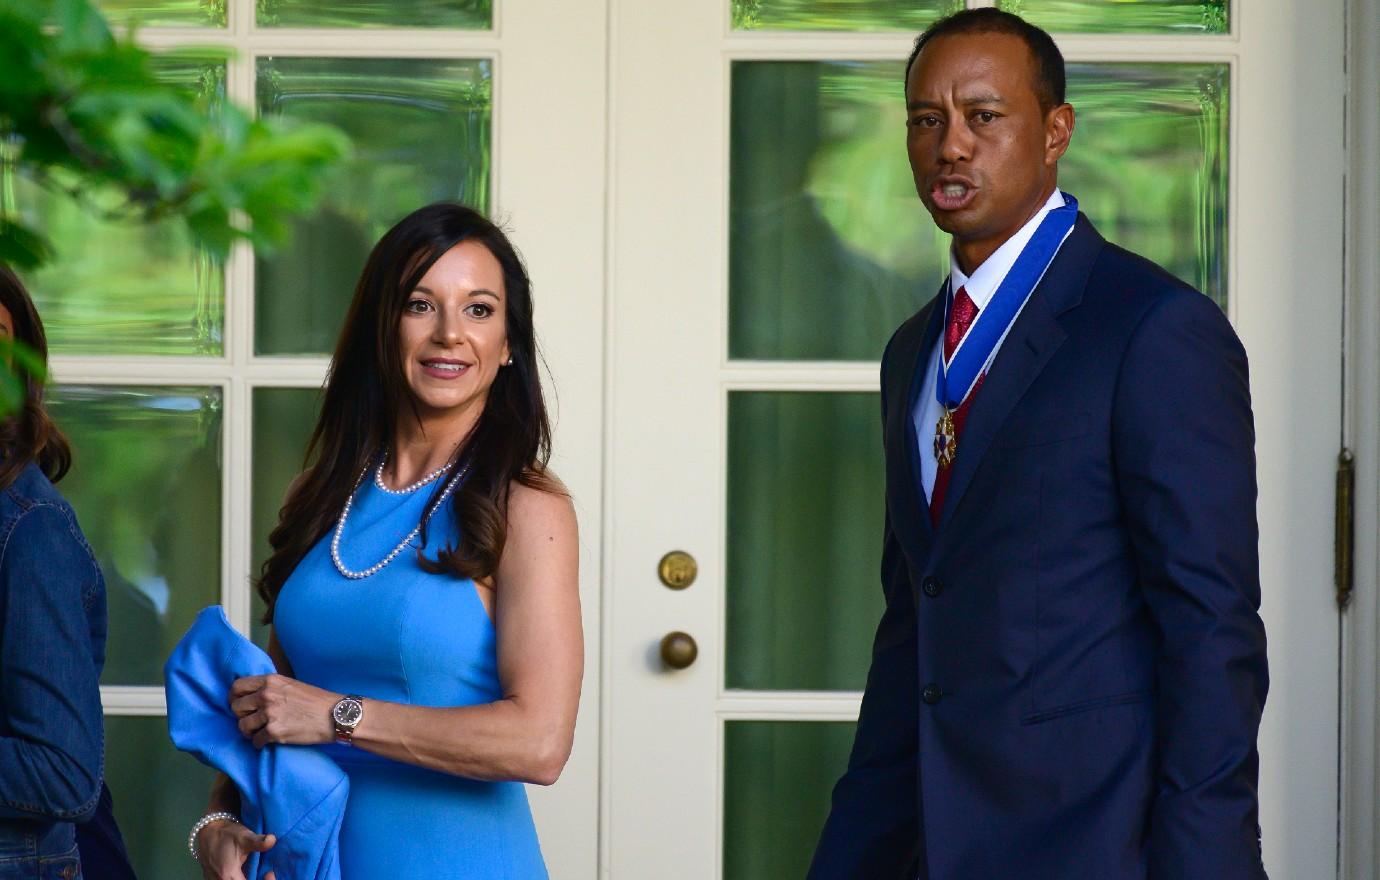 Tiger Woods Tricked Erica Herman Into Being Locked Out Of Her Home